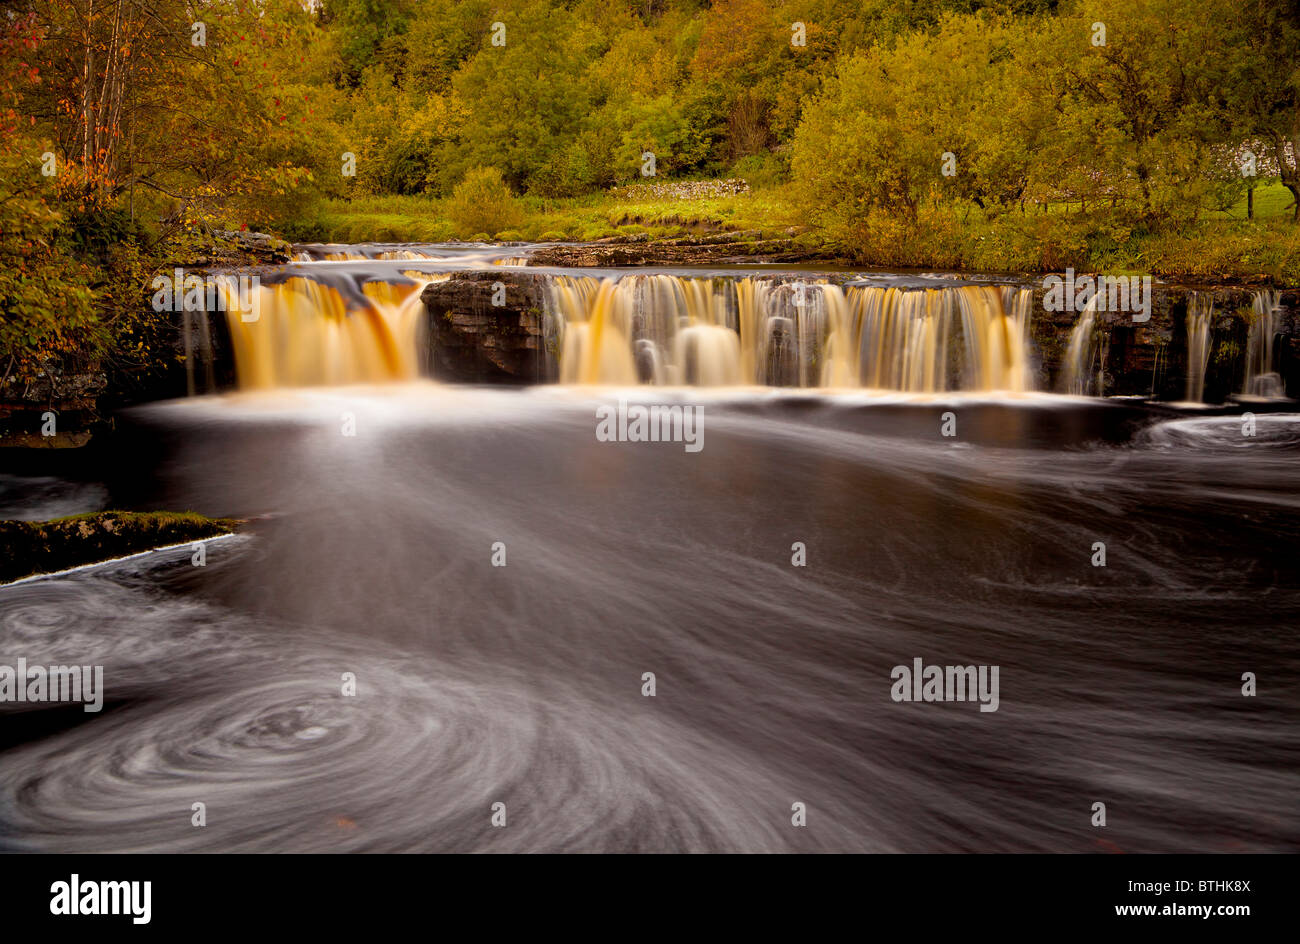 Wain Wath force on the river Swale in the Yorkshire Dales. Stock Photo